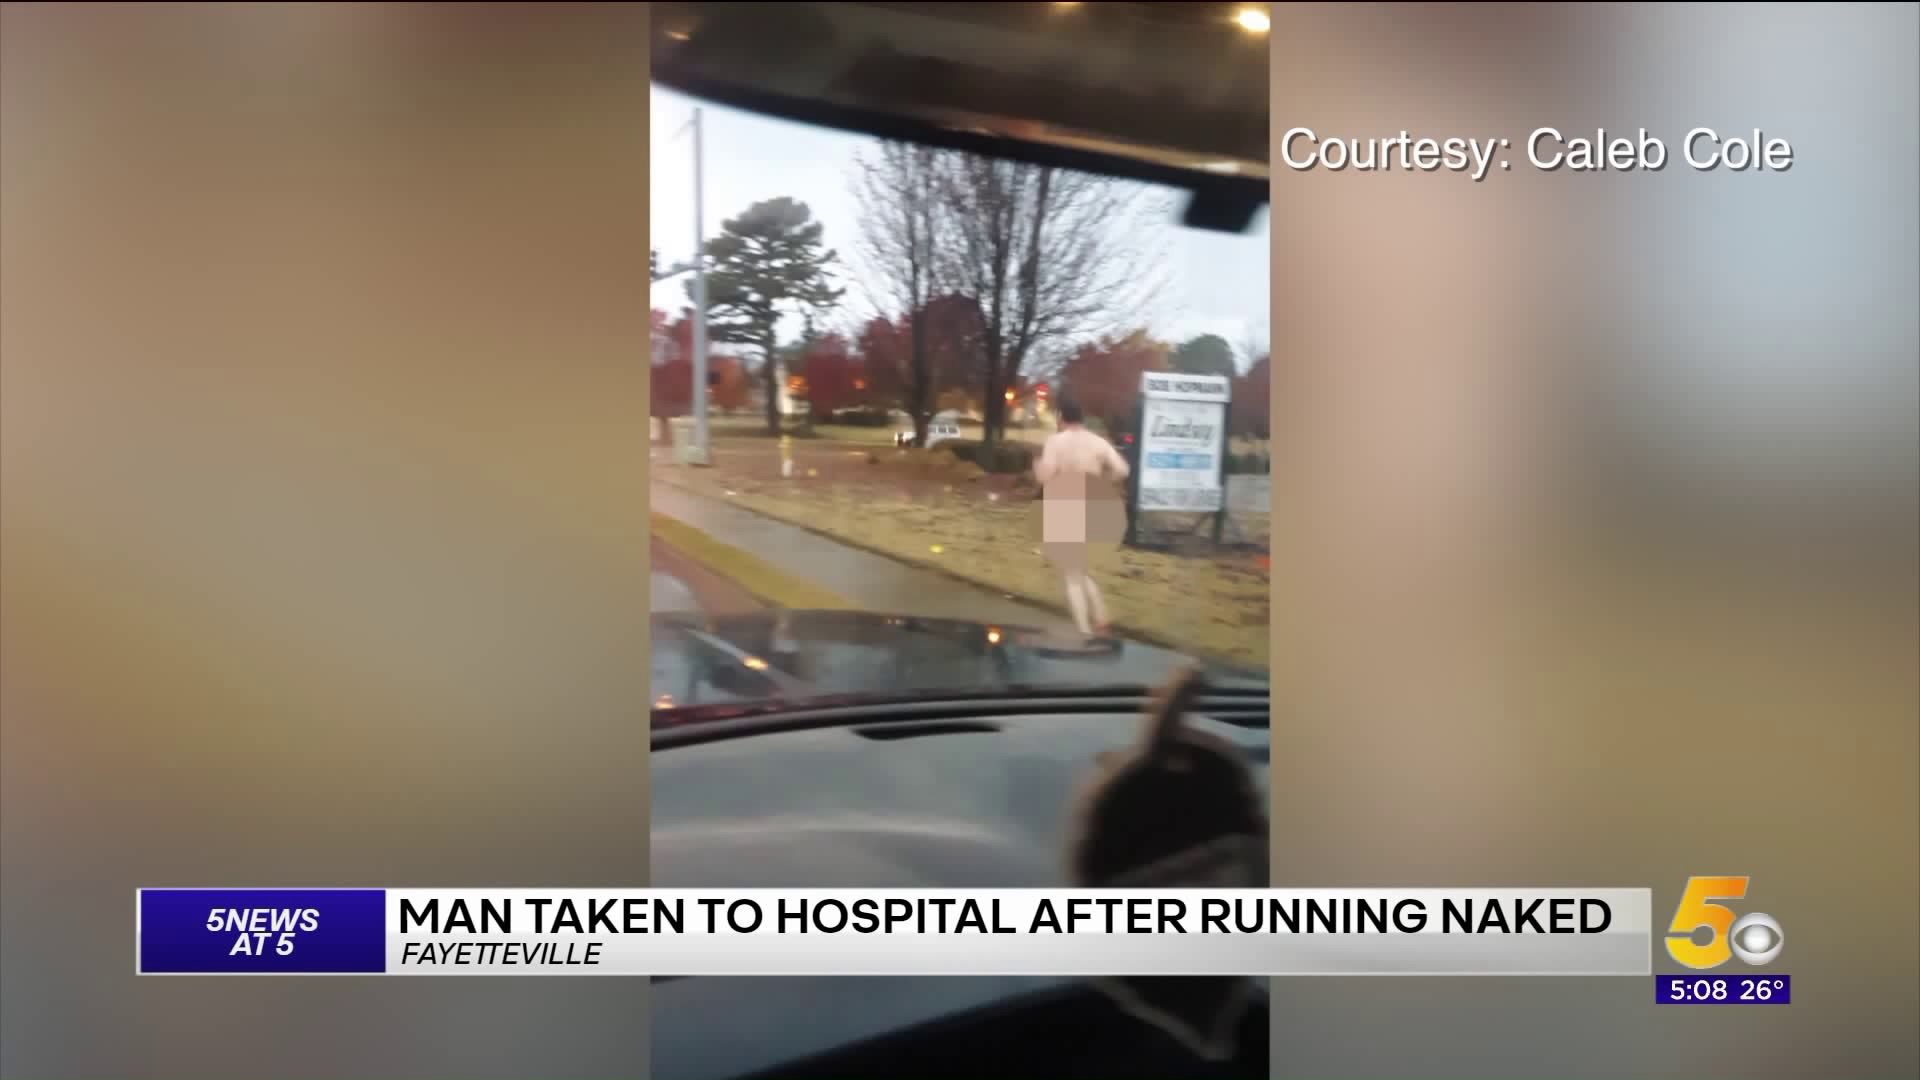 Man Taken To Hospital After Running Naked In Fayetteville